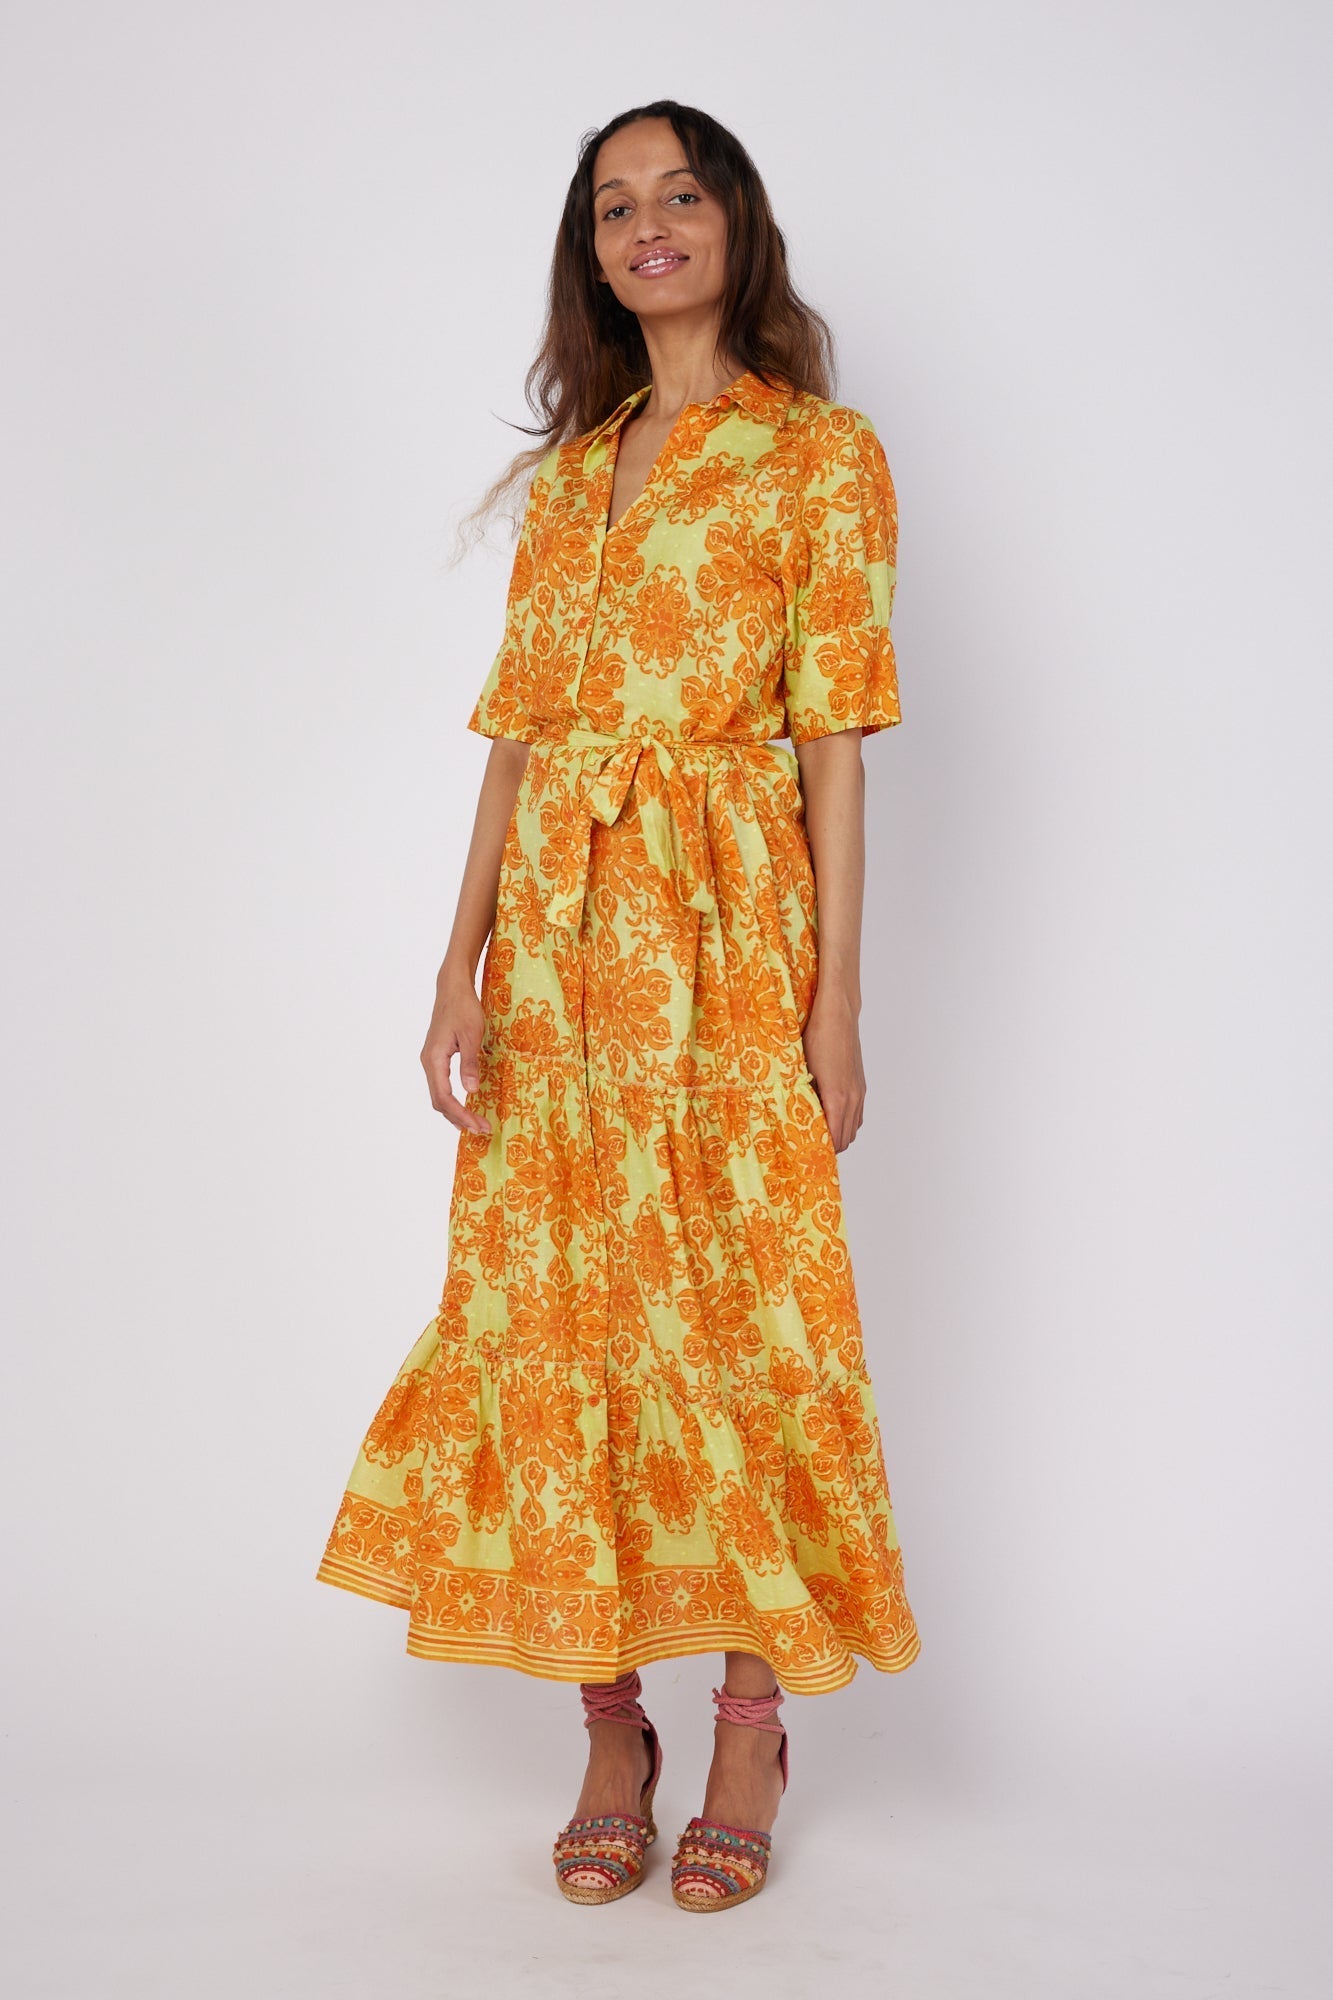 ModaPosa Alcee Short Puff Sleeve Maxi Dress with Collar and Detachable Belt in Curacao Majolica . Discover women's resort dresses and lifestyle clothing inspired by the Mediterranean. Free worldwide shipping available!